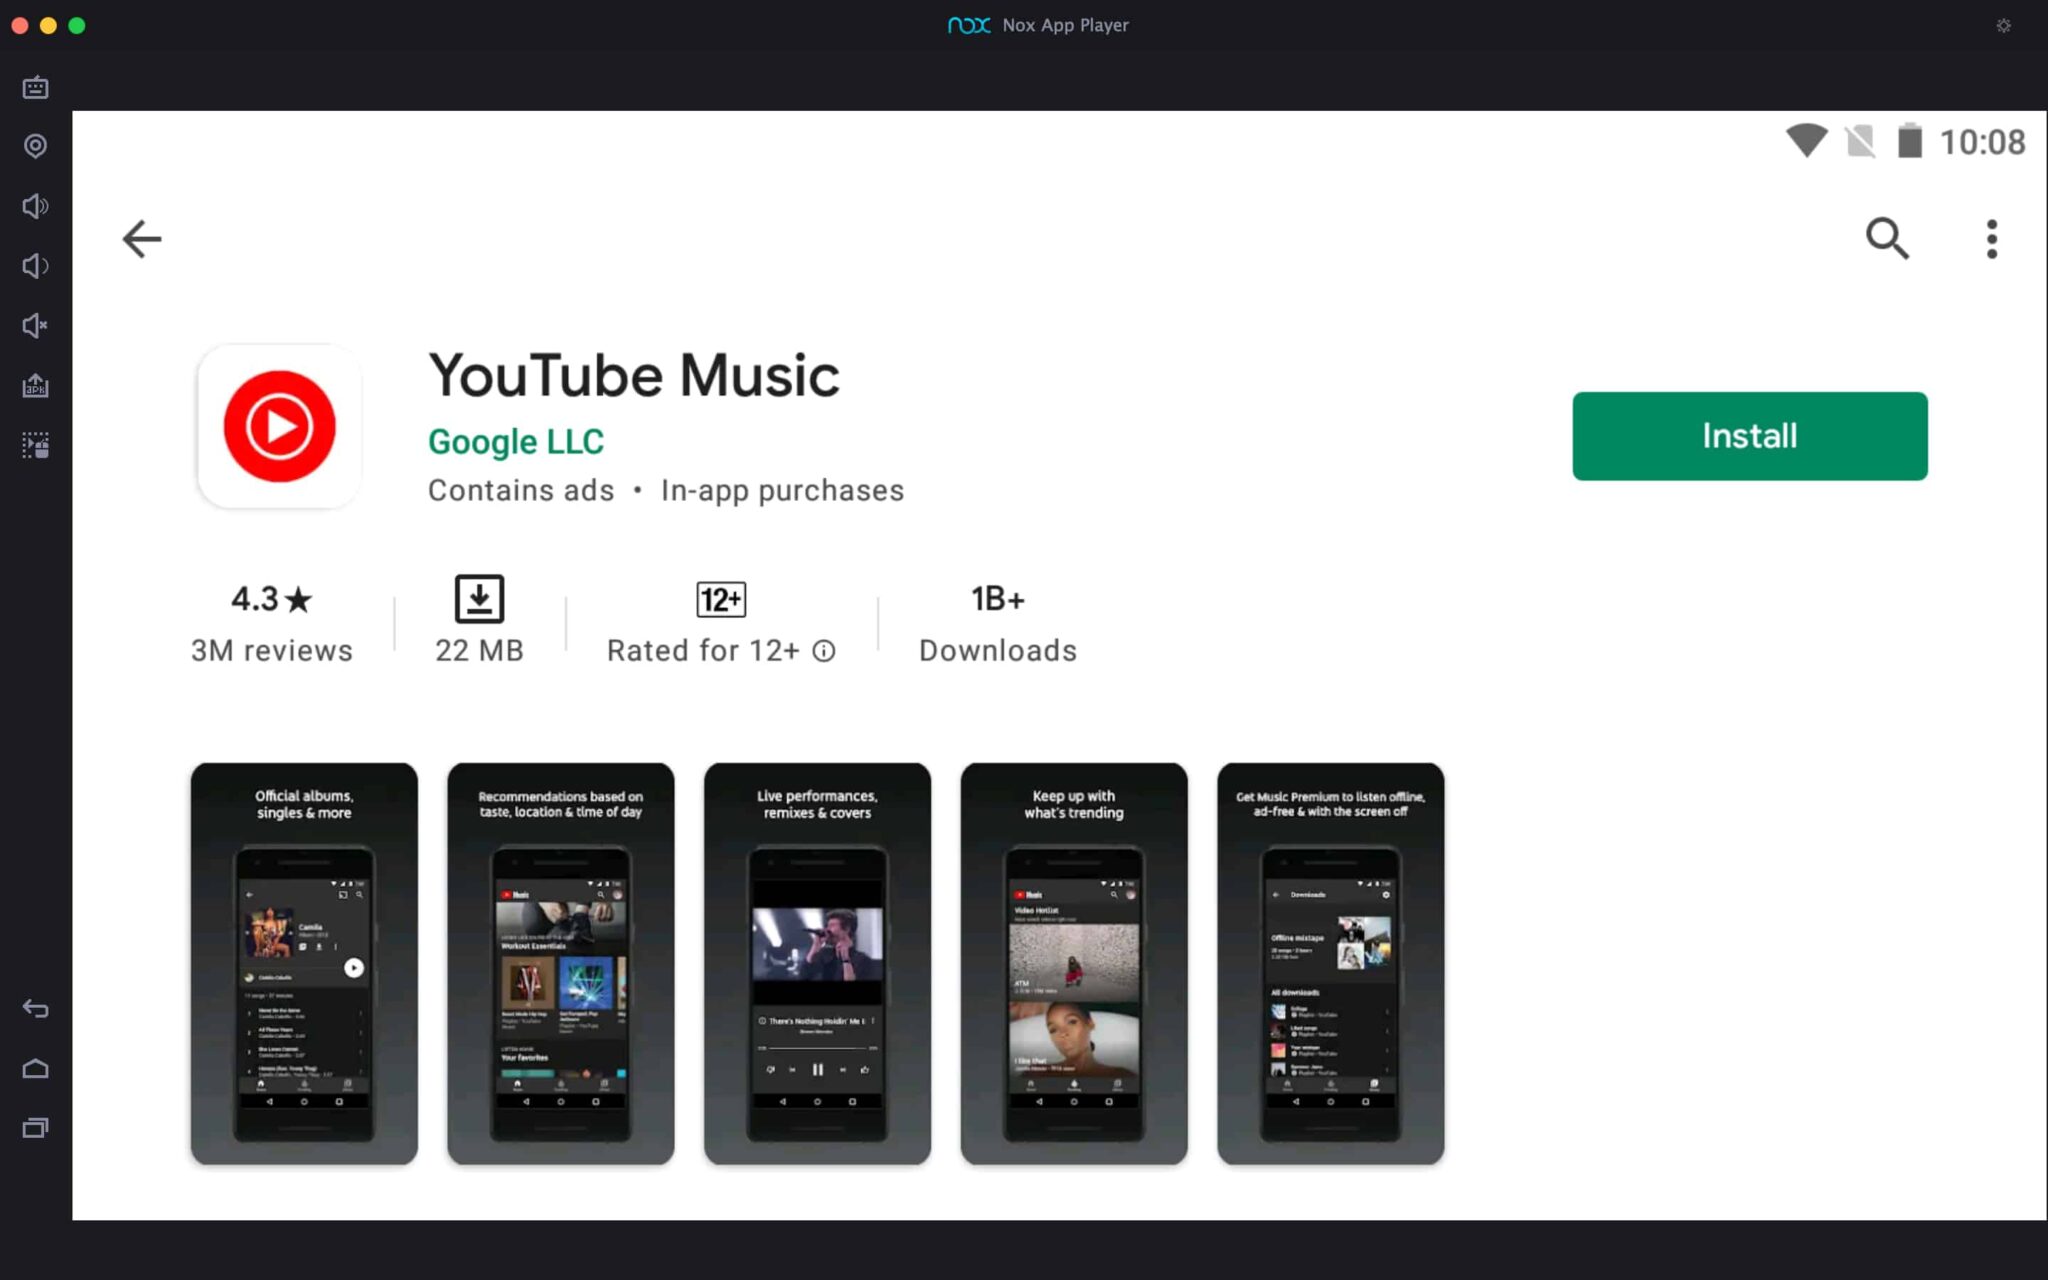 YouTube Music App For PC installation